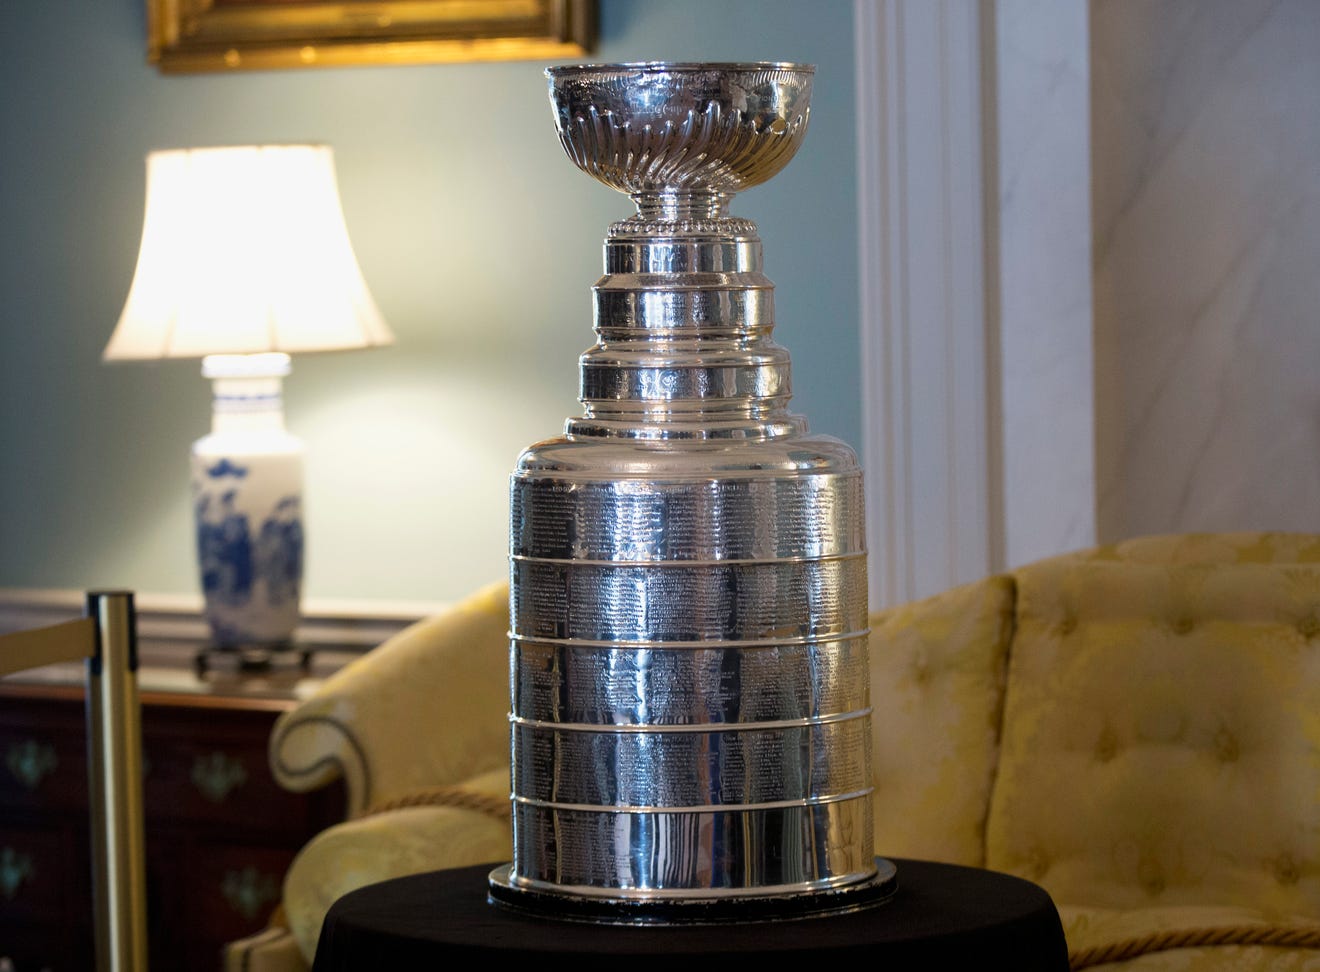 FILE - The NHL is unveiling a new logo for the Stanley Cup playoffs and final that replaces the one used for the past 13 years. The league is revealing it later Monday, March 7, 2022.